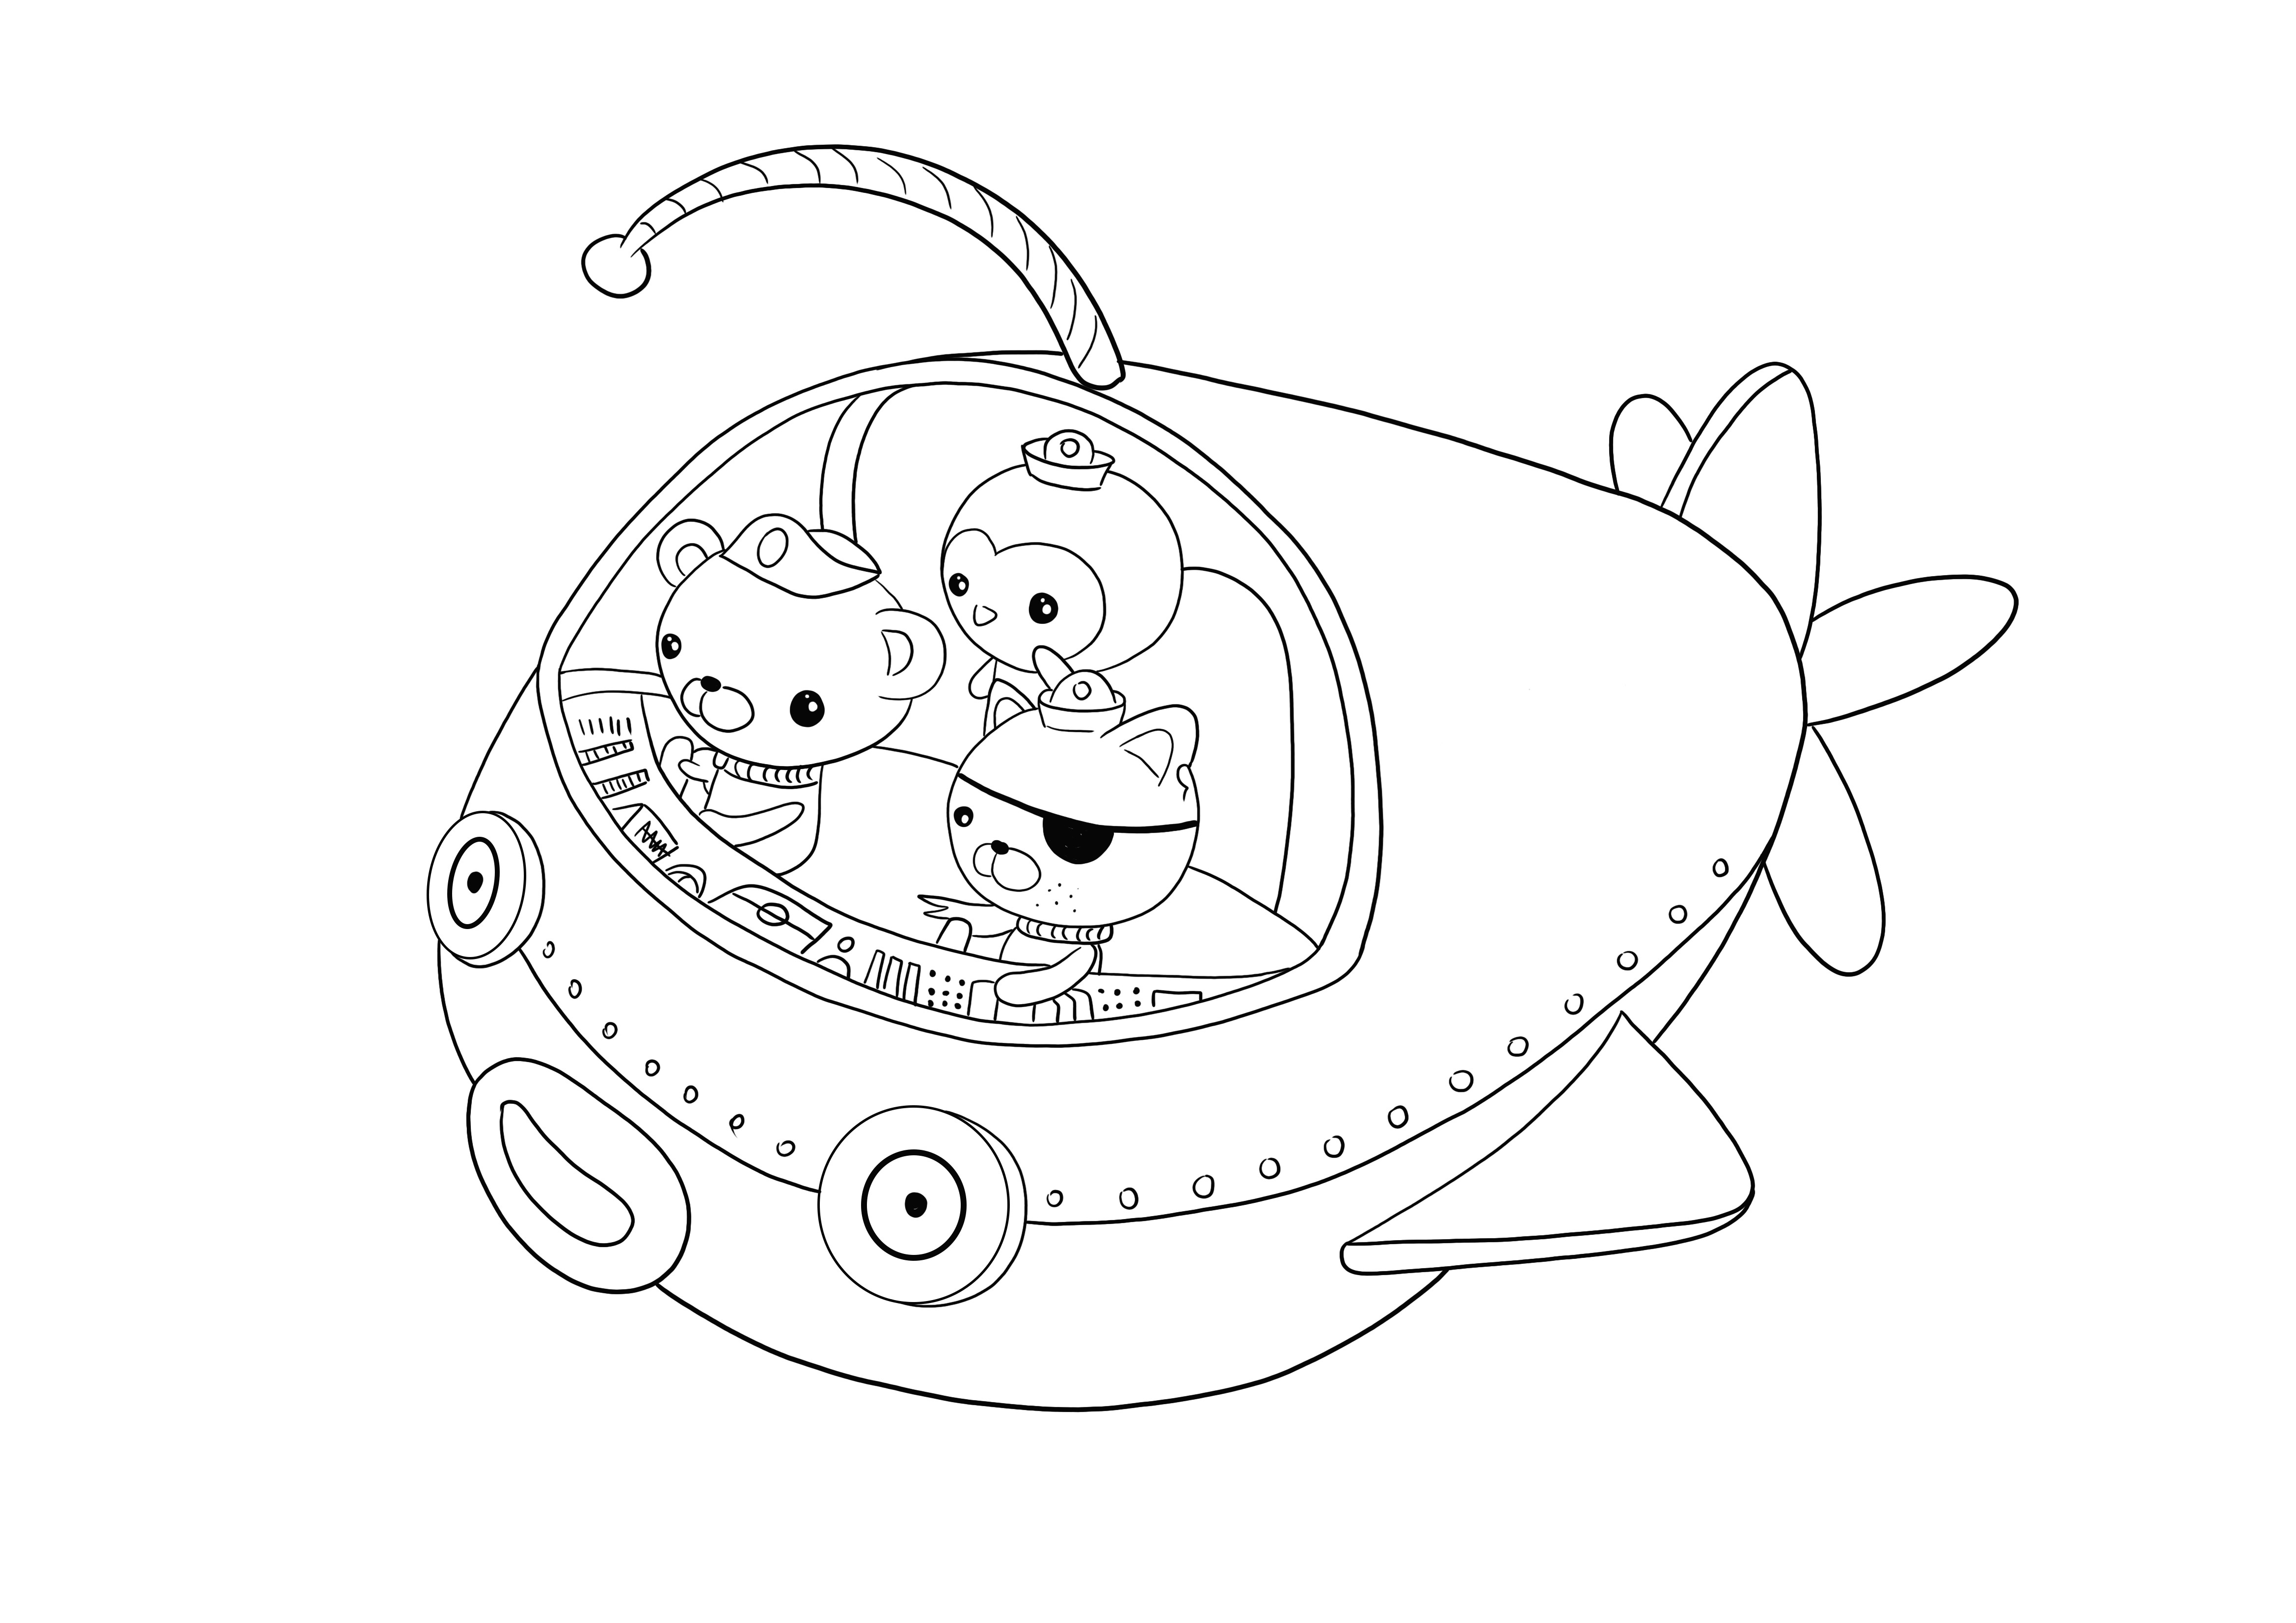 Octonauts off to Adventure coloring image free to download